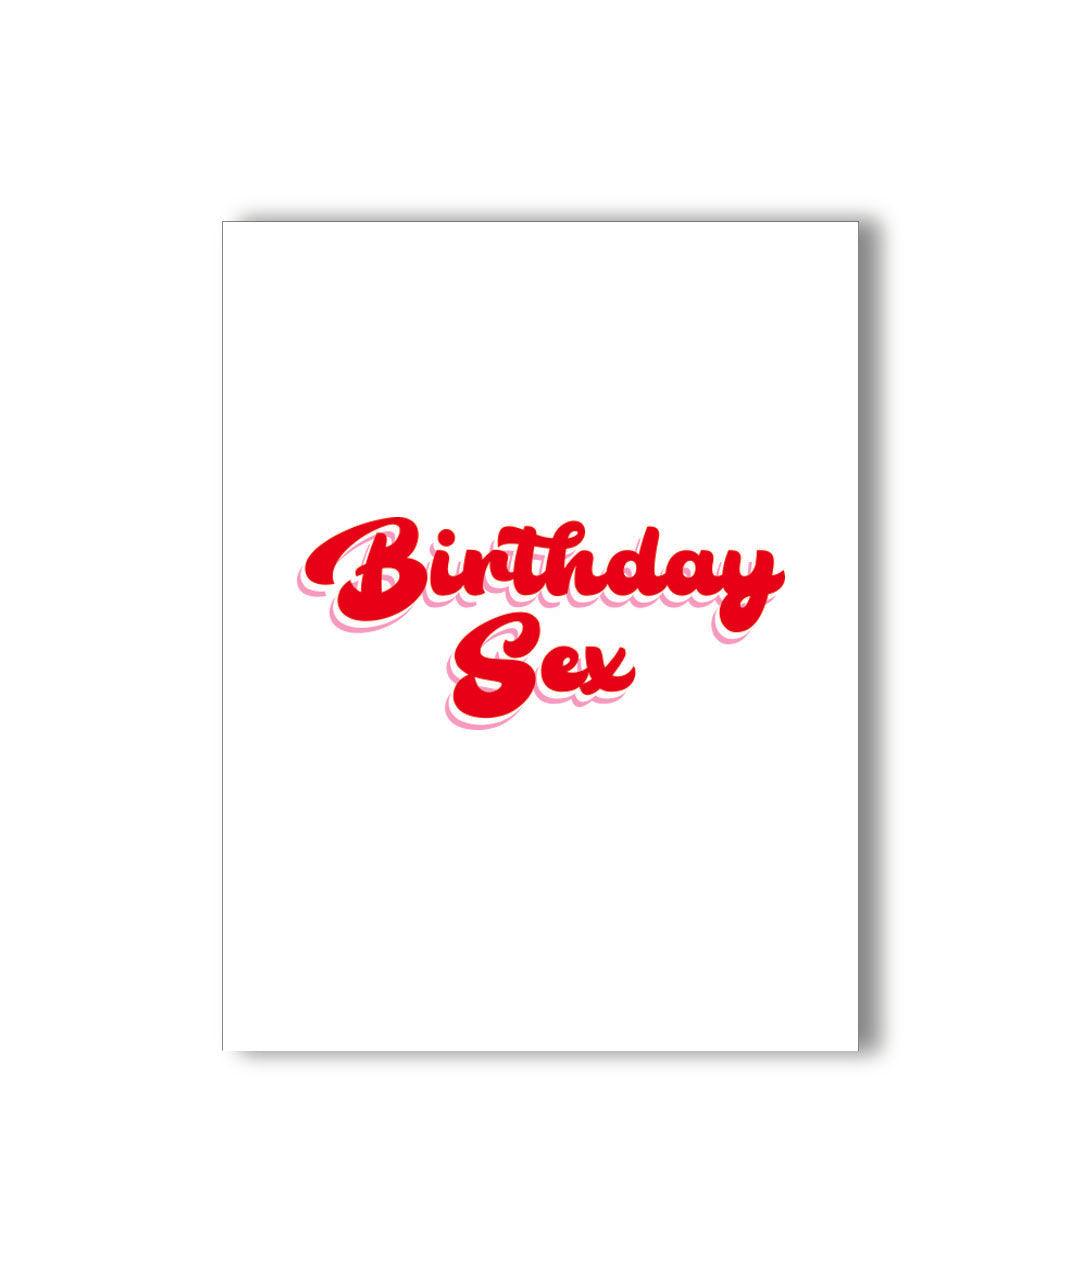 The Birthday Sex Greeting Card by NaughtyKards says &quot;Birthday Sex&quot; with bold, red retro lettering.